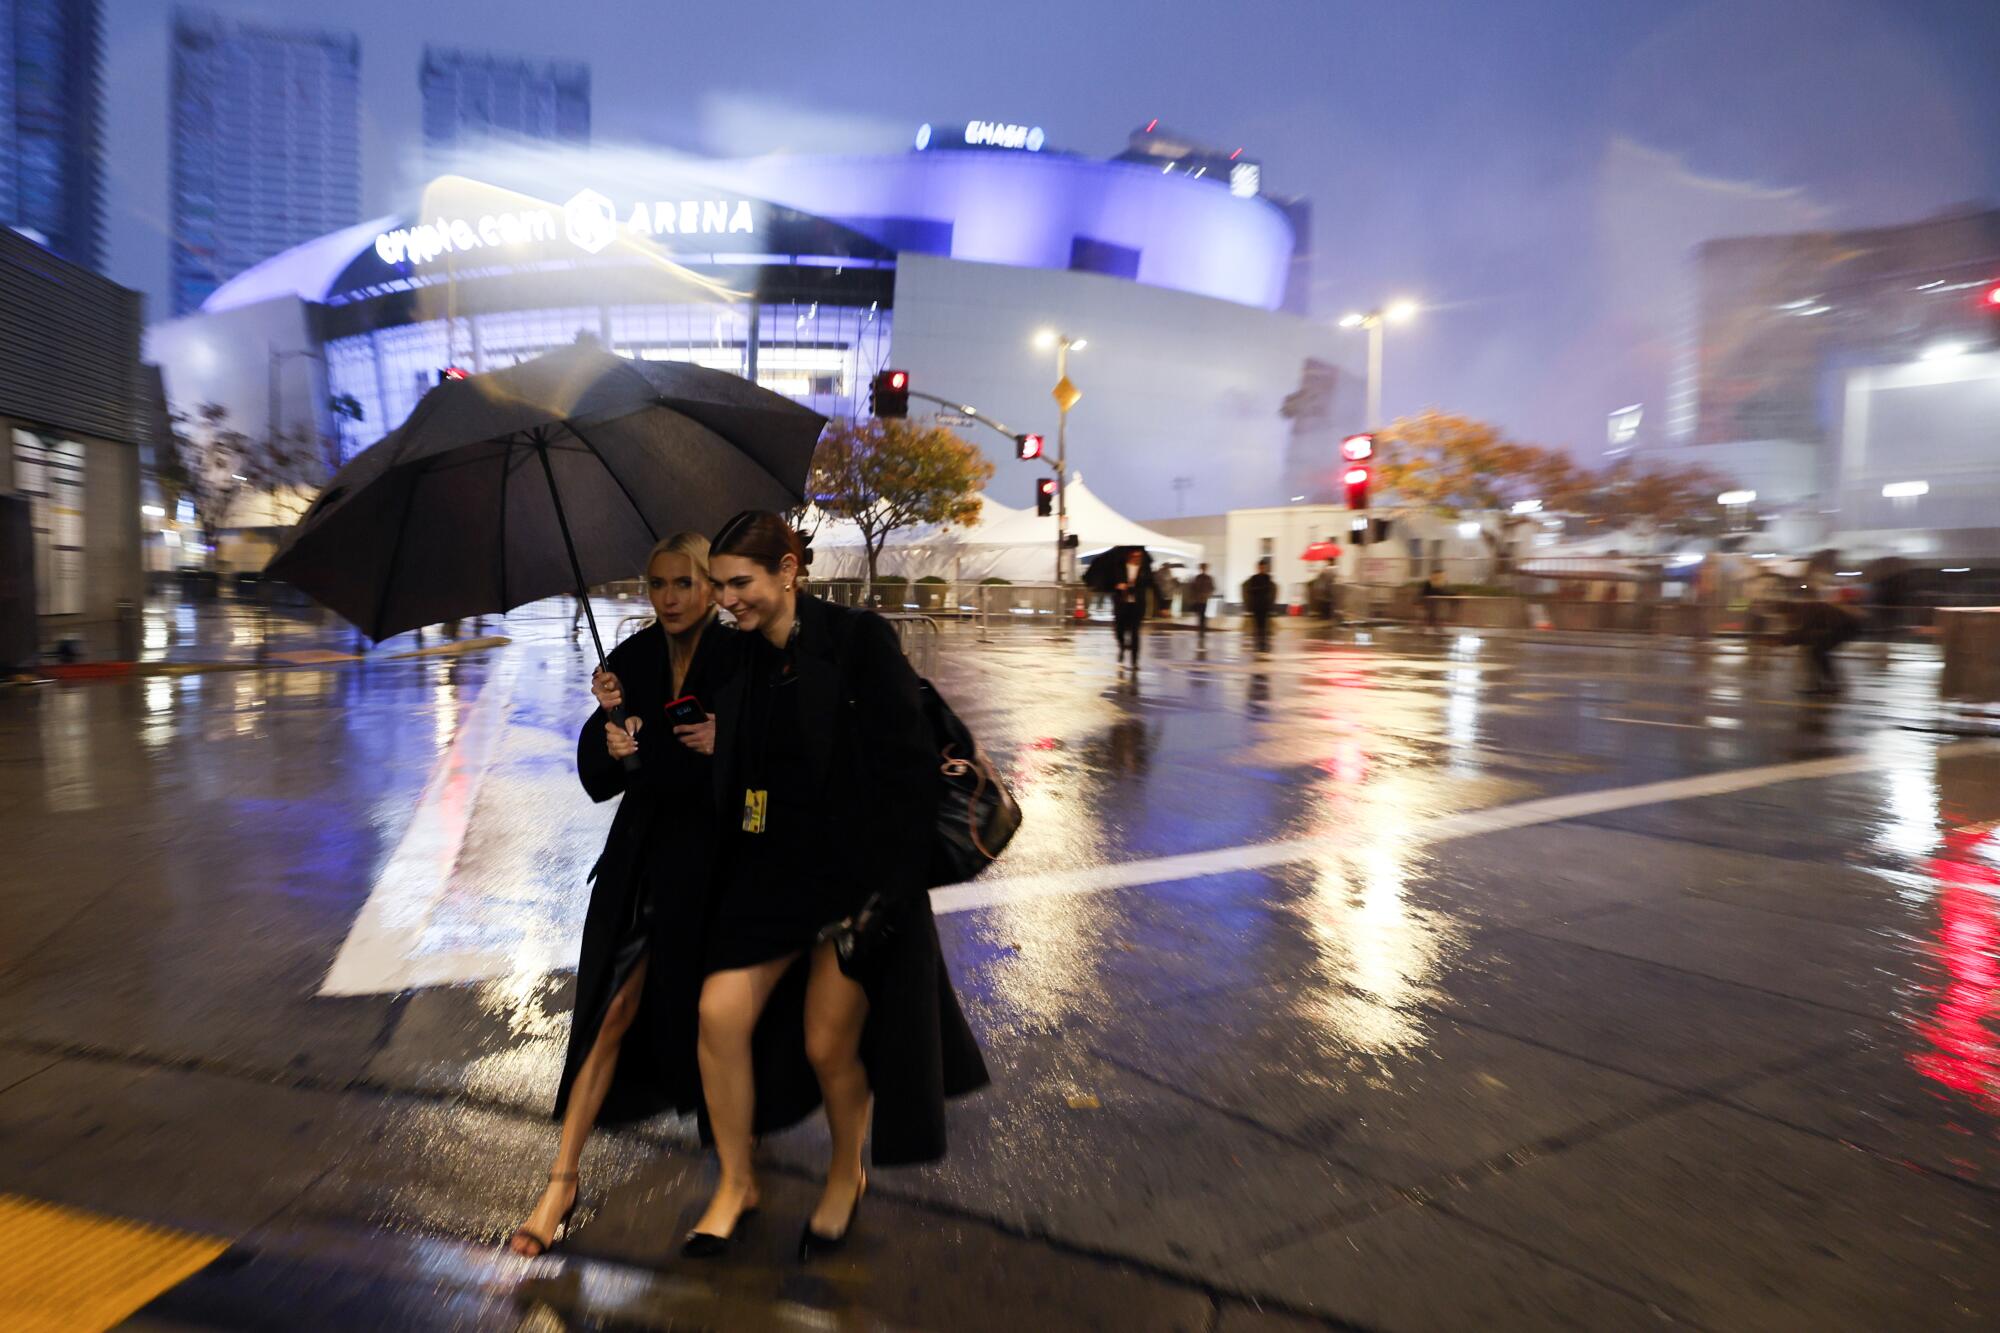 People attending the Grammys run between the red carpet and a parking garage as another storm bears down.